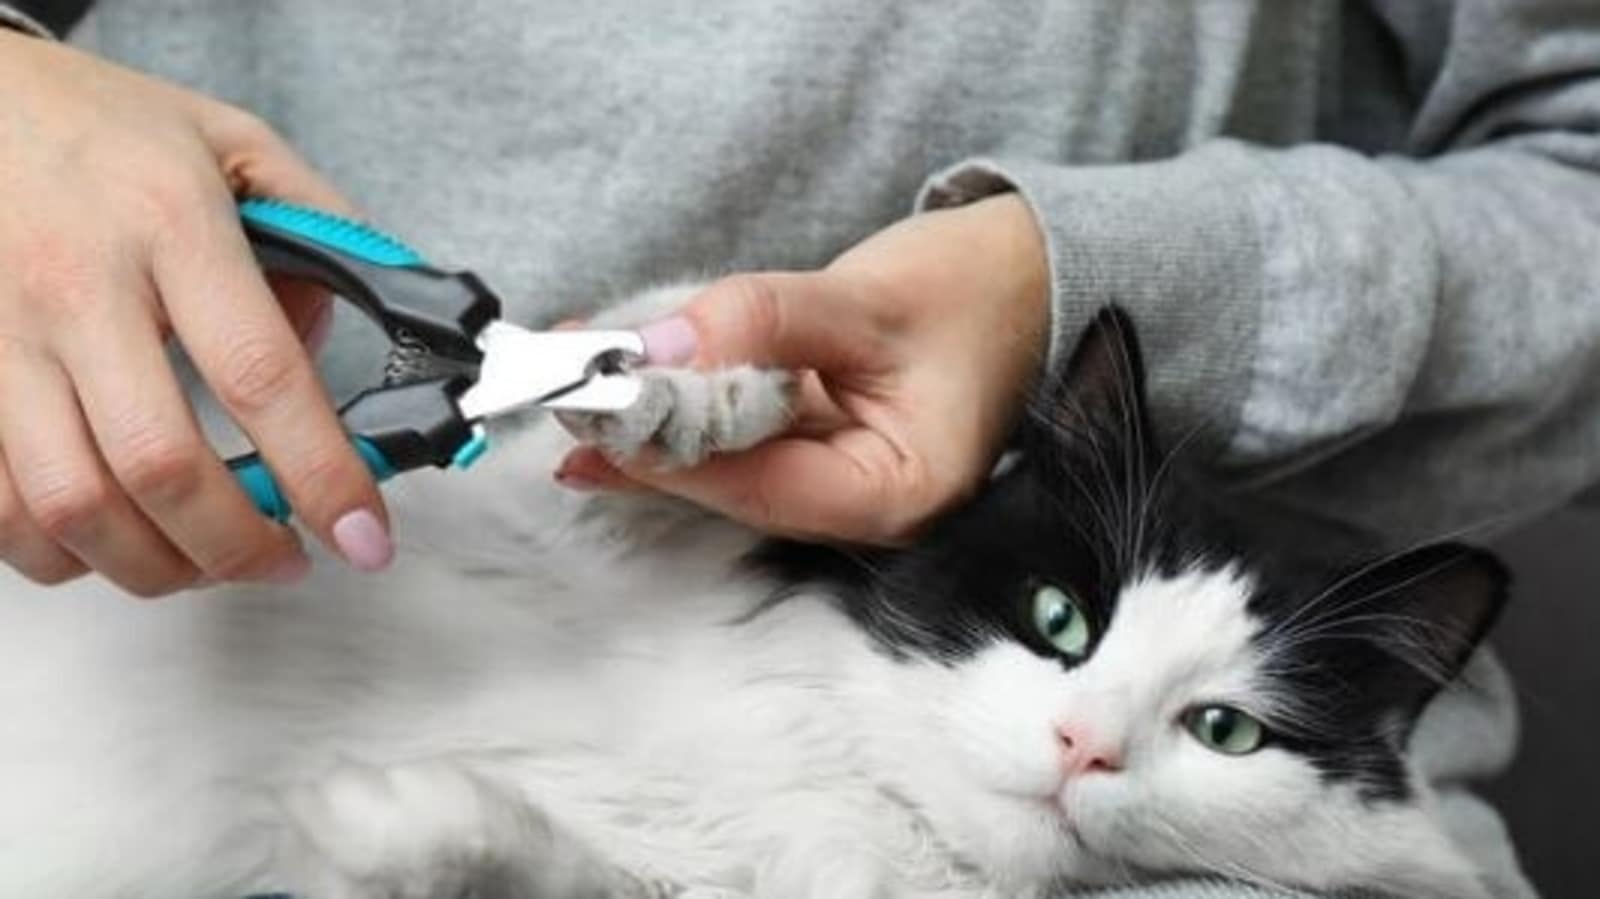 Buy Dogs & Cats Nail Clippers Online: Small & Large Pets Clippers @DakPets